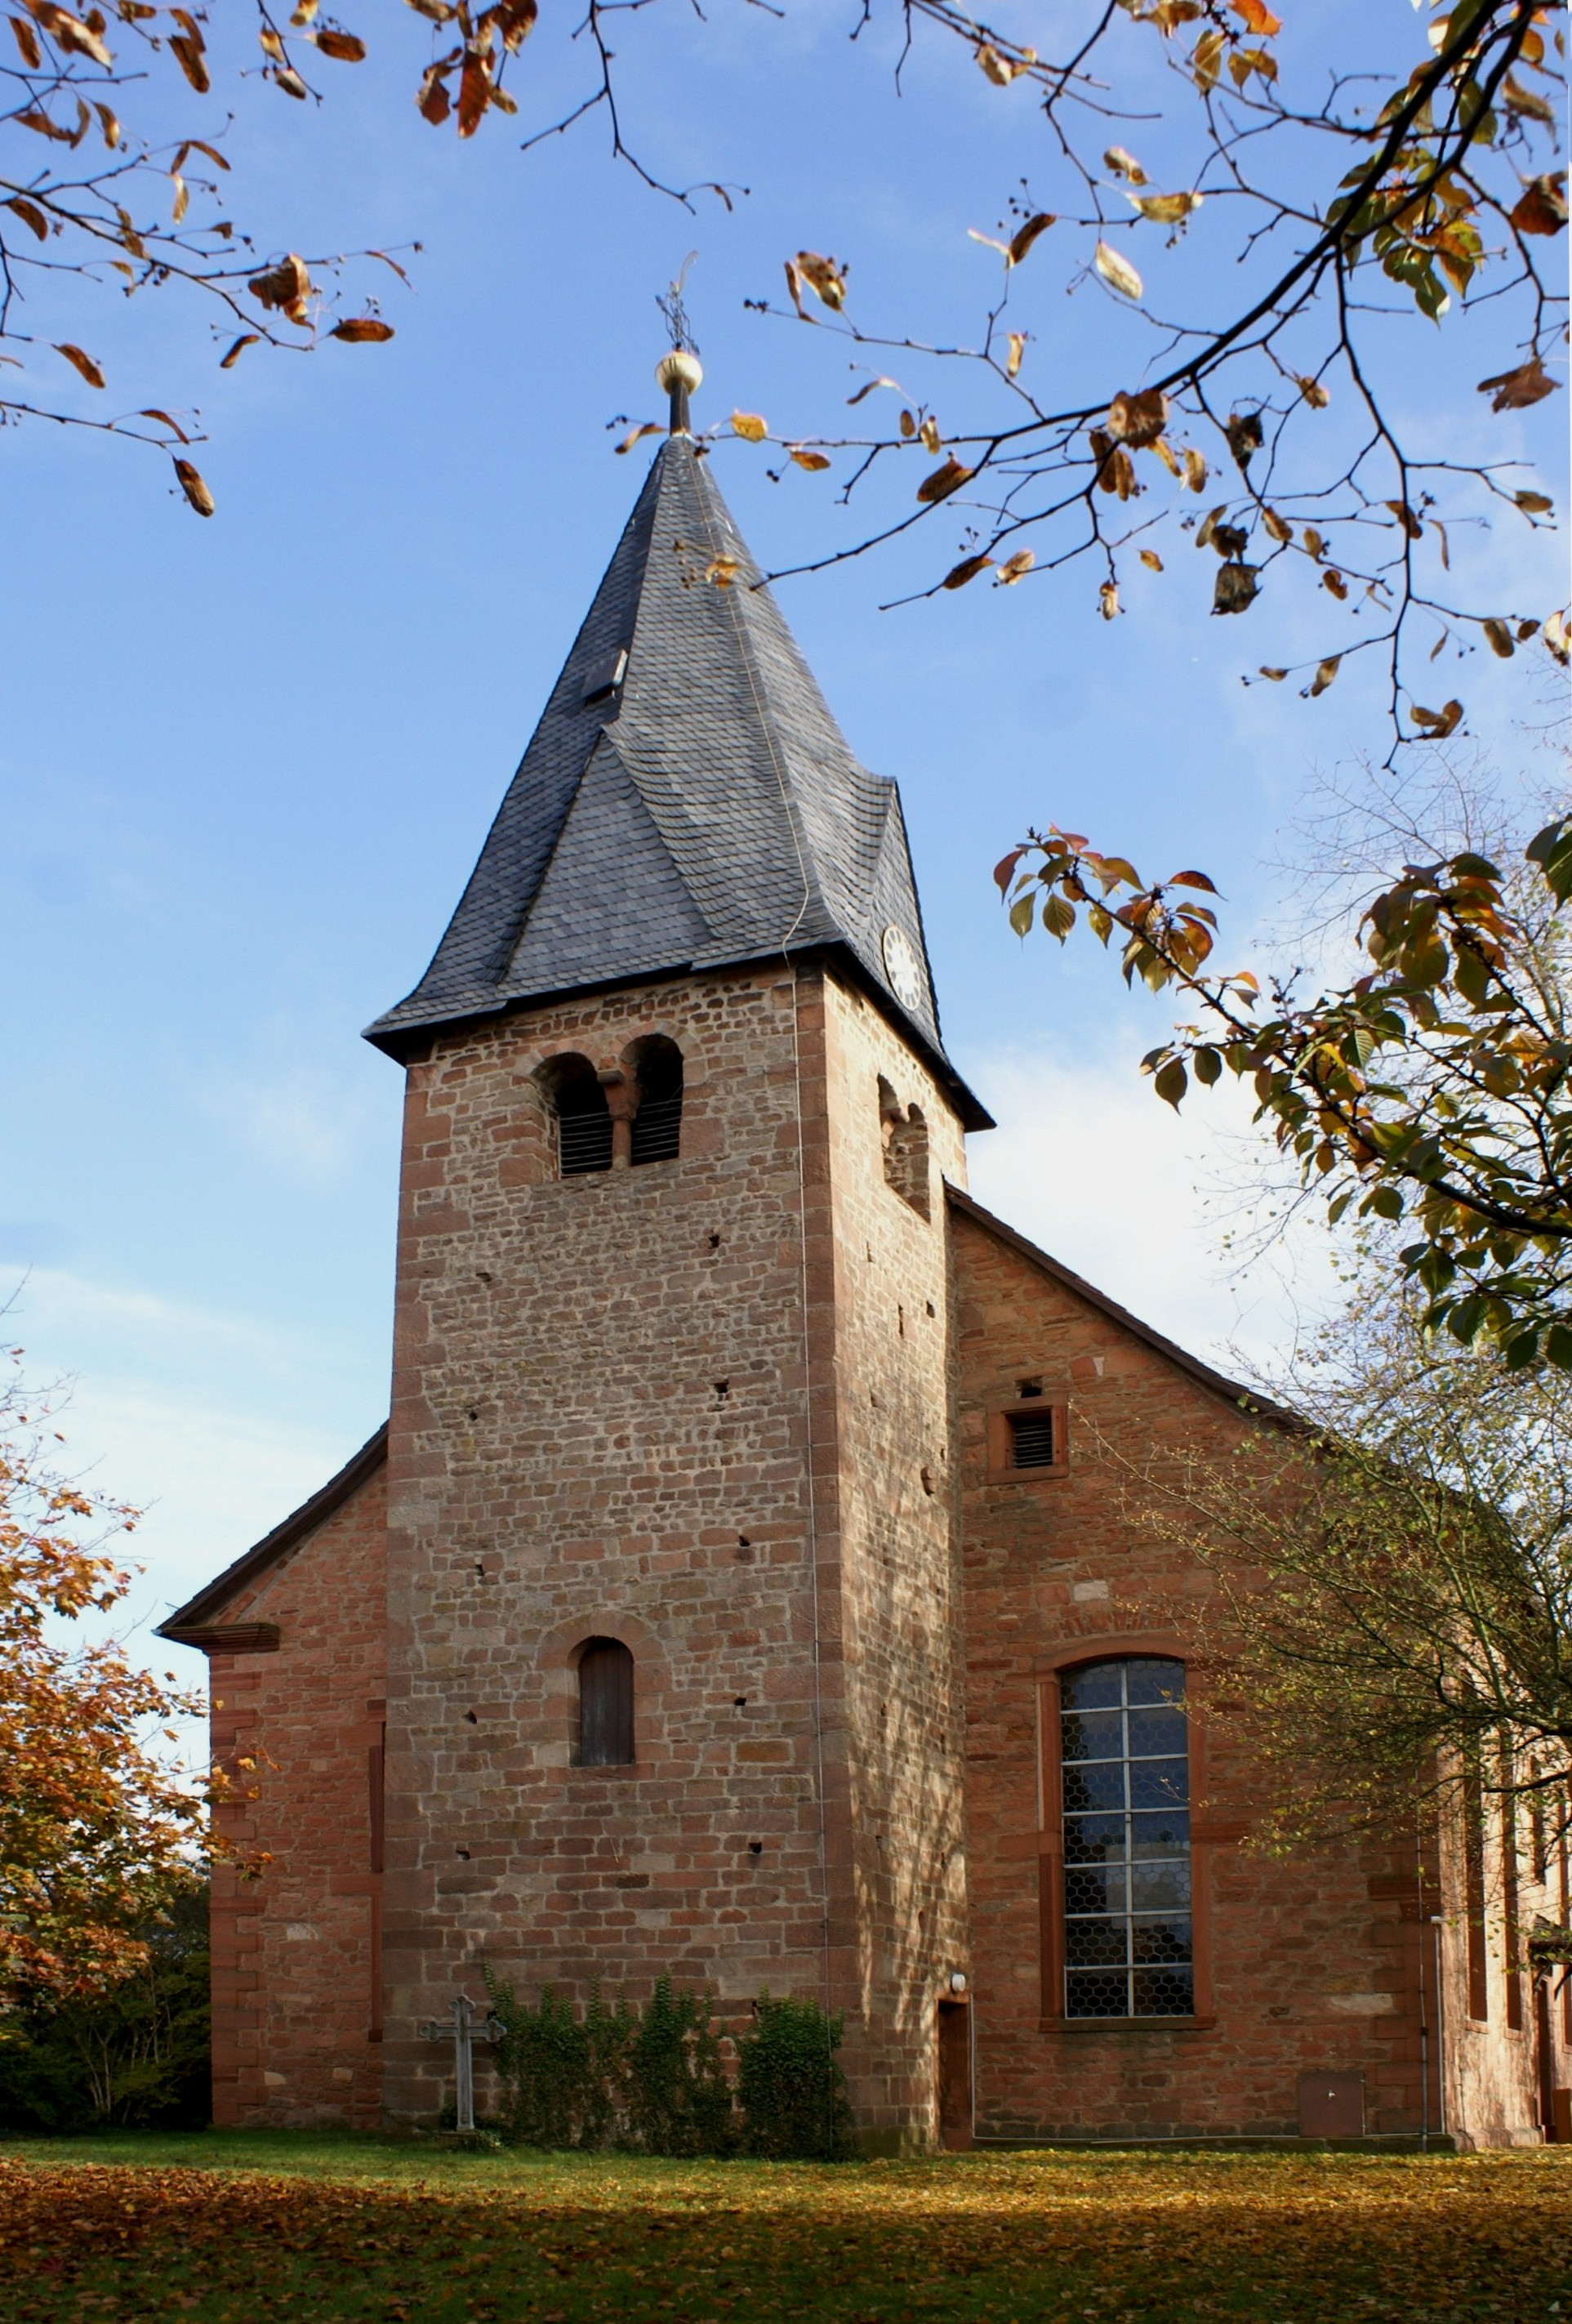 Photo of the Laurentiskirche in Niedermittlau. The tower of the church dates to the 1100s. Photo from Wikimedia Commons.    